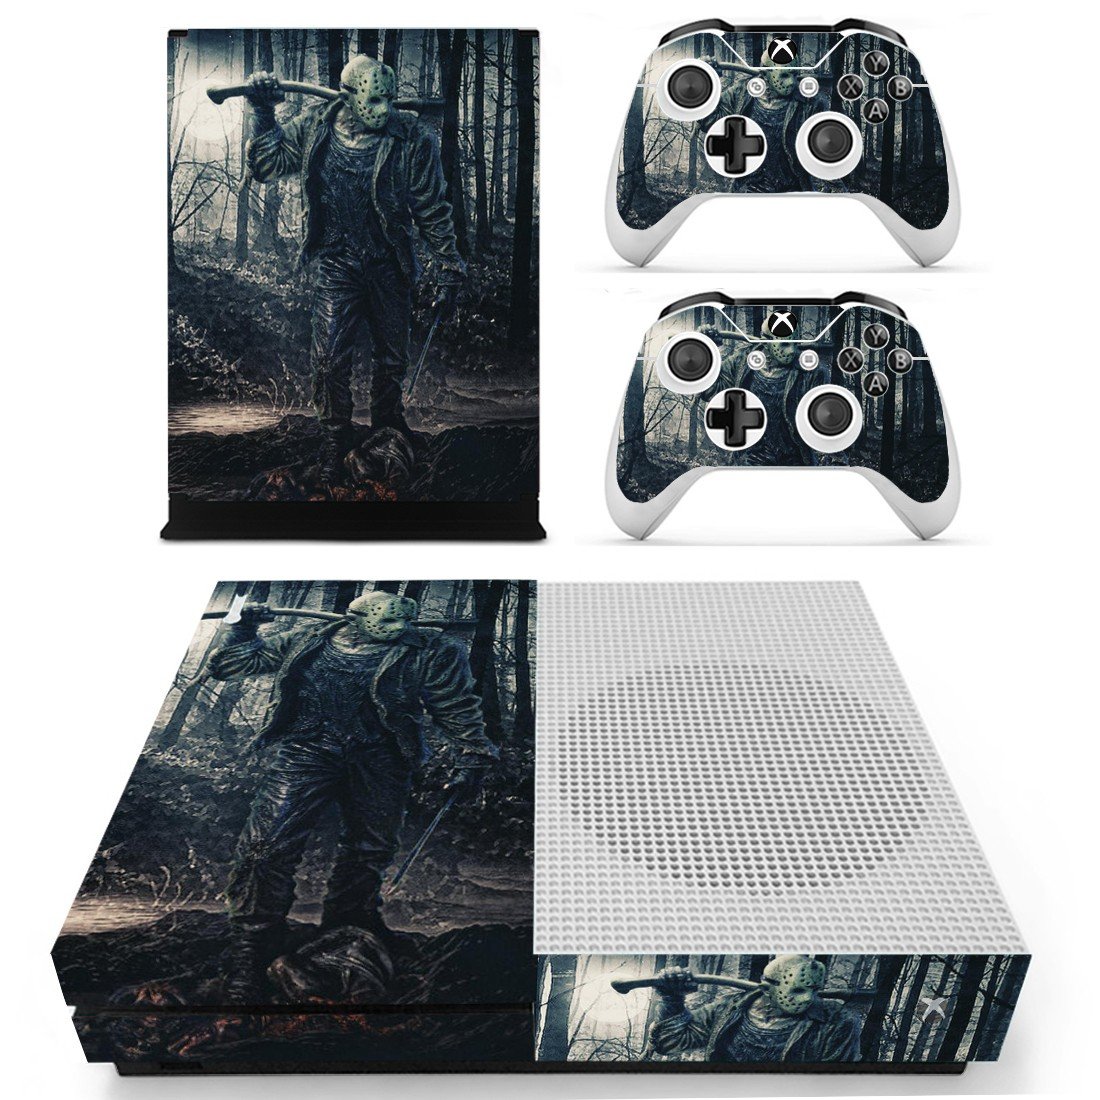 Xbox One S And Controllers Skin Sticker -Friday the 13th